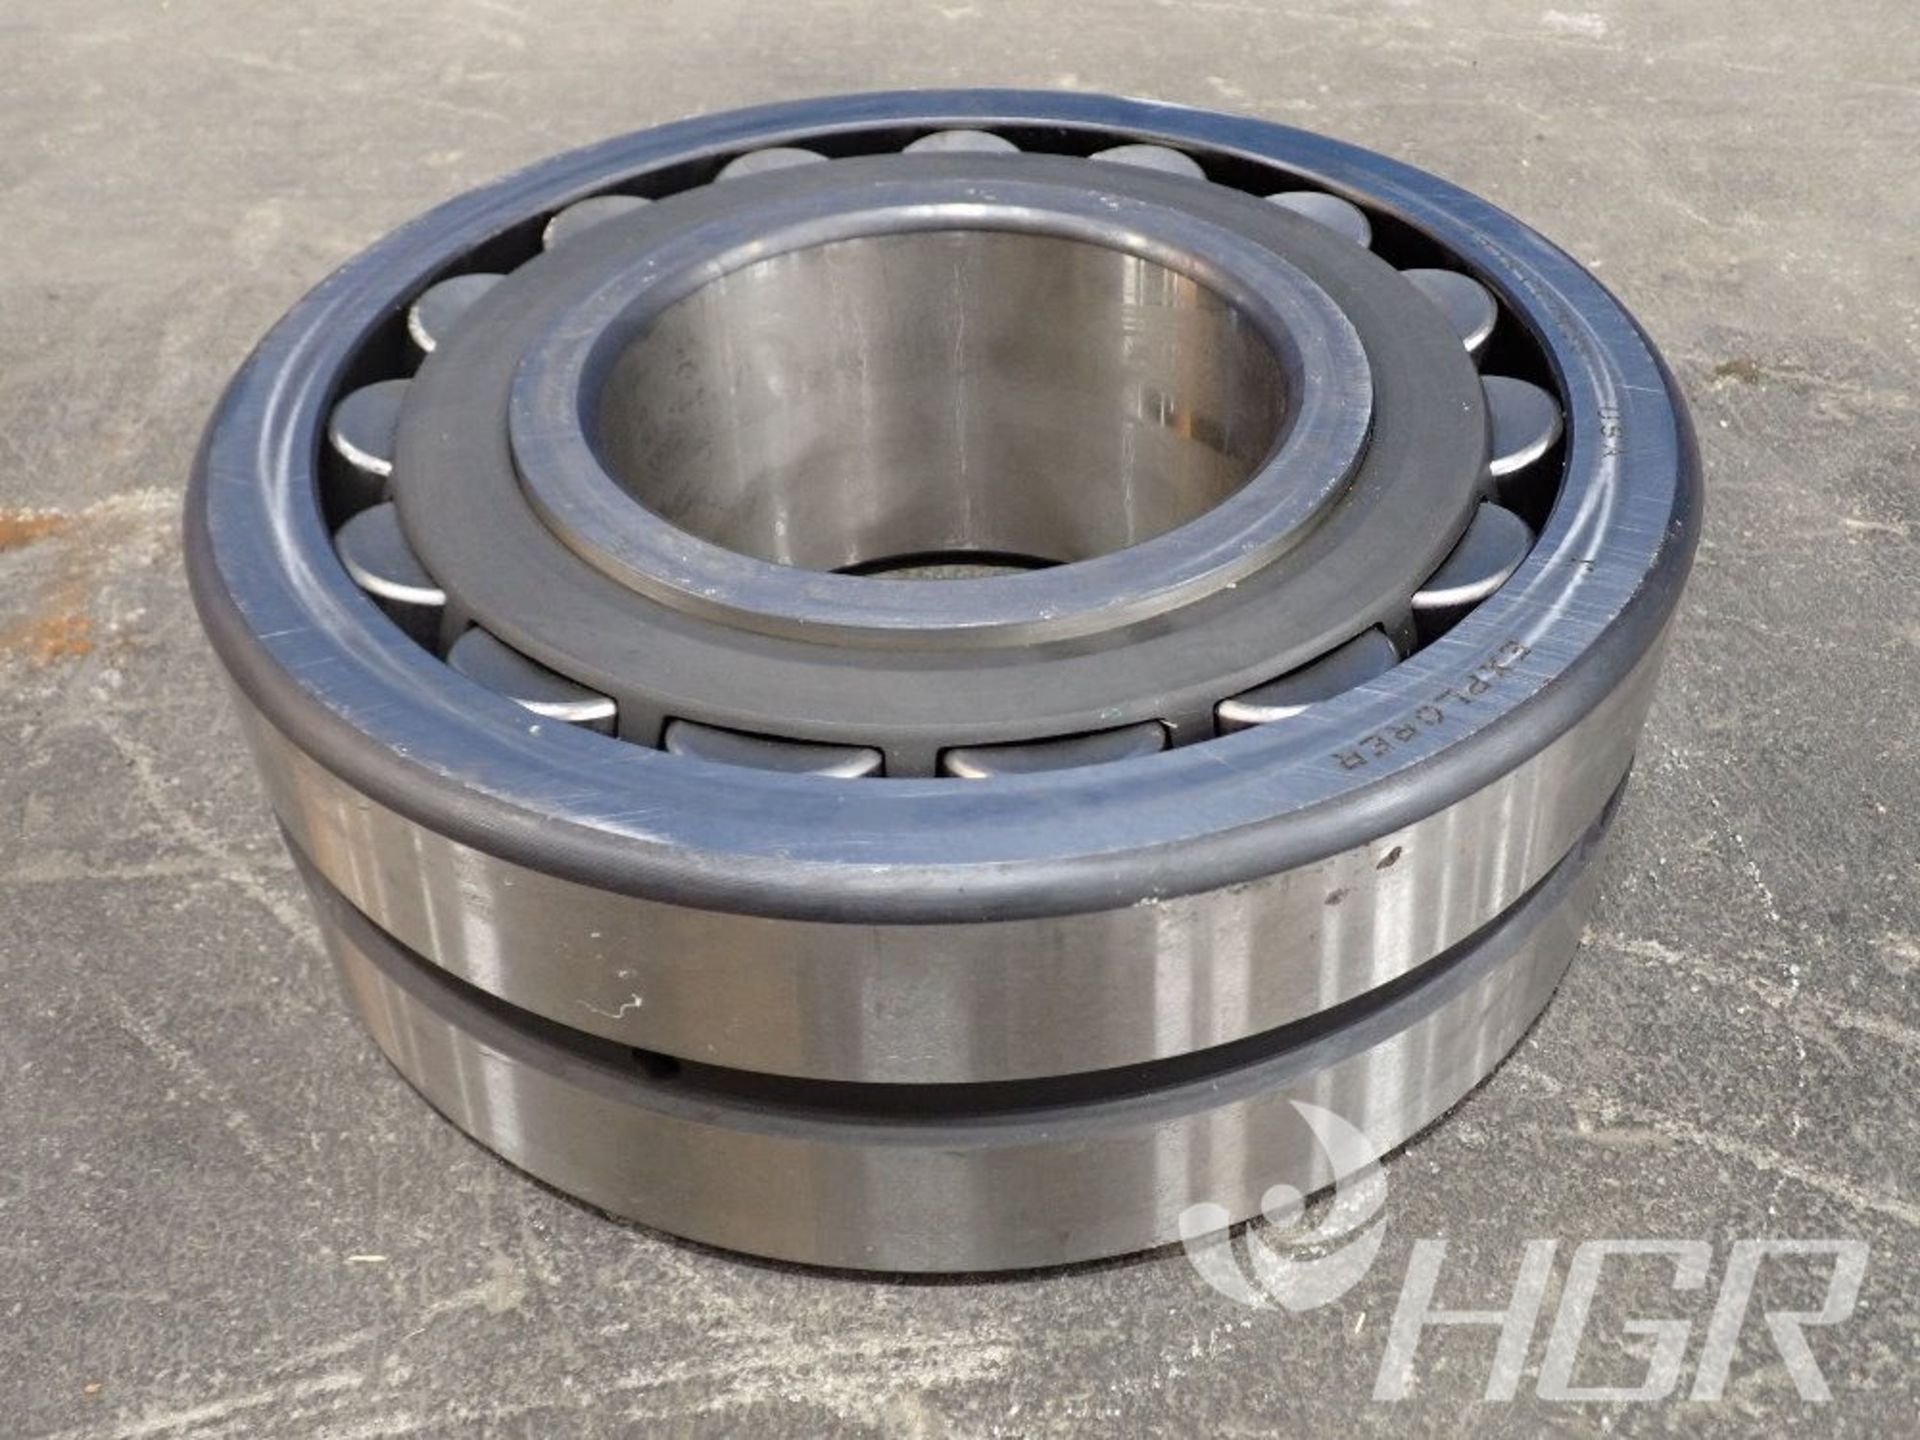 SKF BEARING, Model 22328 CC/W33, Date: n/a; s/n n/a, Approx. Capacity: 5", Power: n/a, Details: - Image 2 of 6